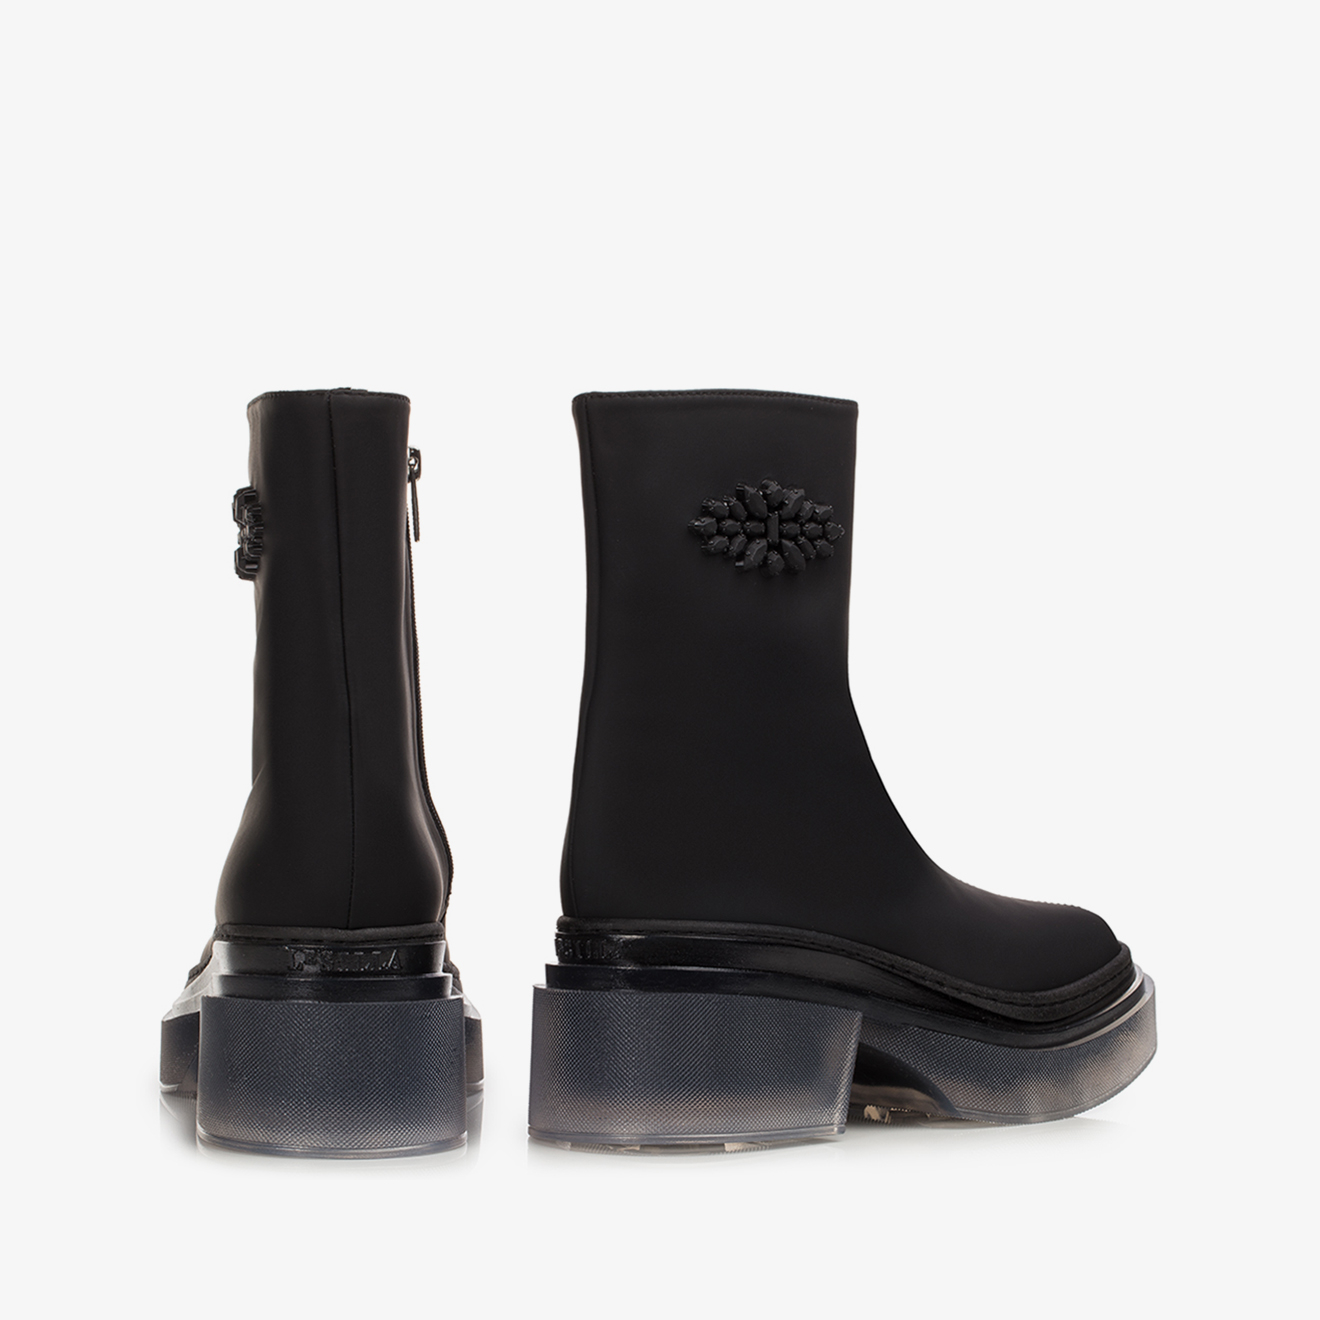 LUNAR ANKLE BOOT 60 mm - Le Silla official outlet